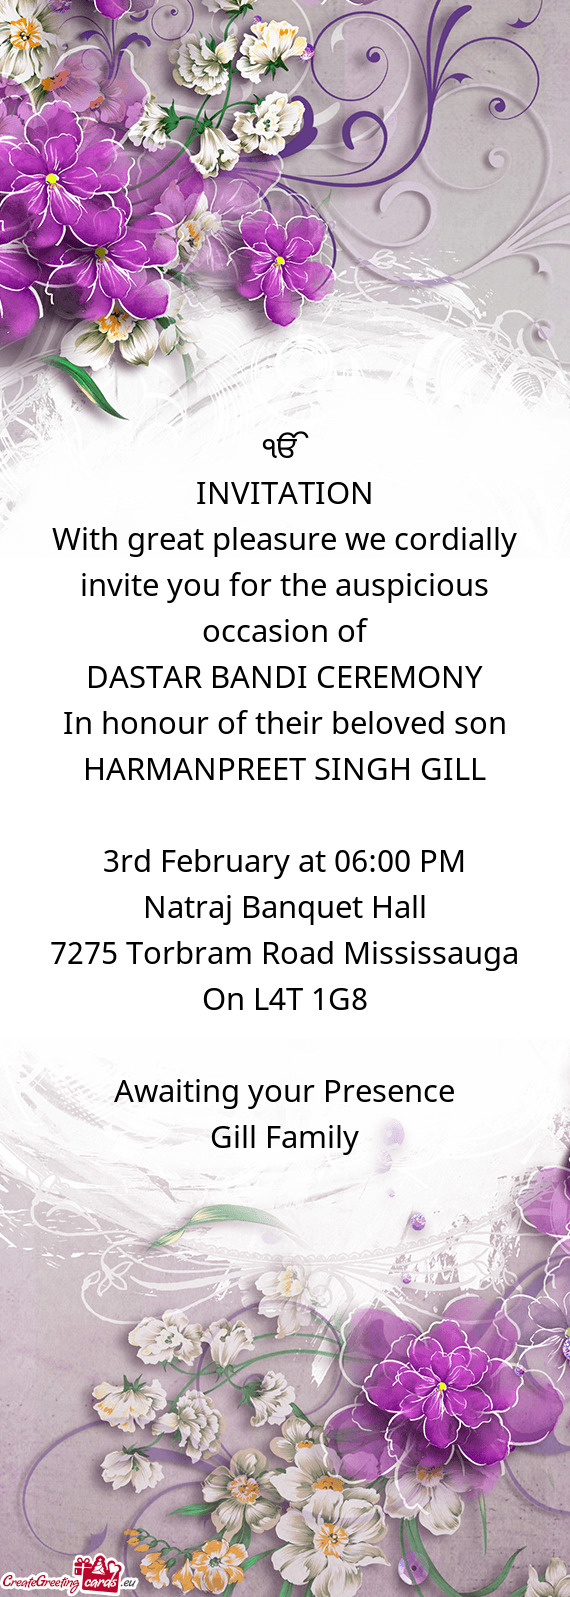 With great pleasure we cordially invite you for the auspicious occasion of